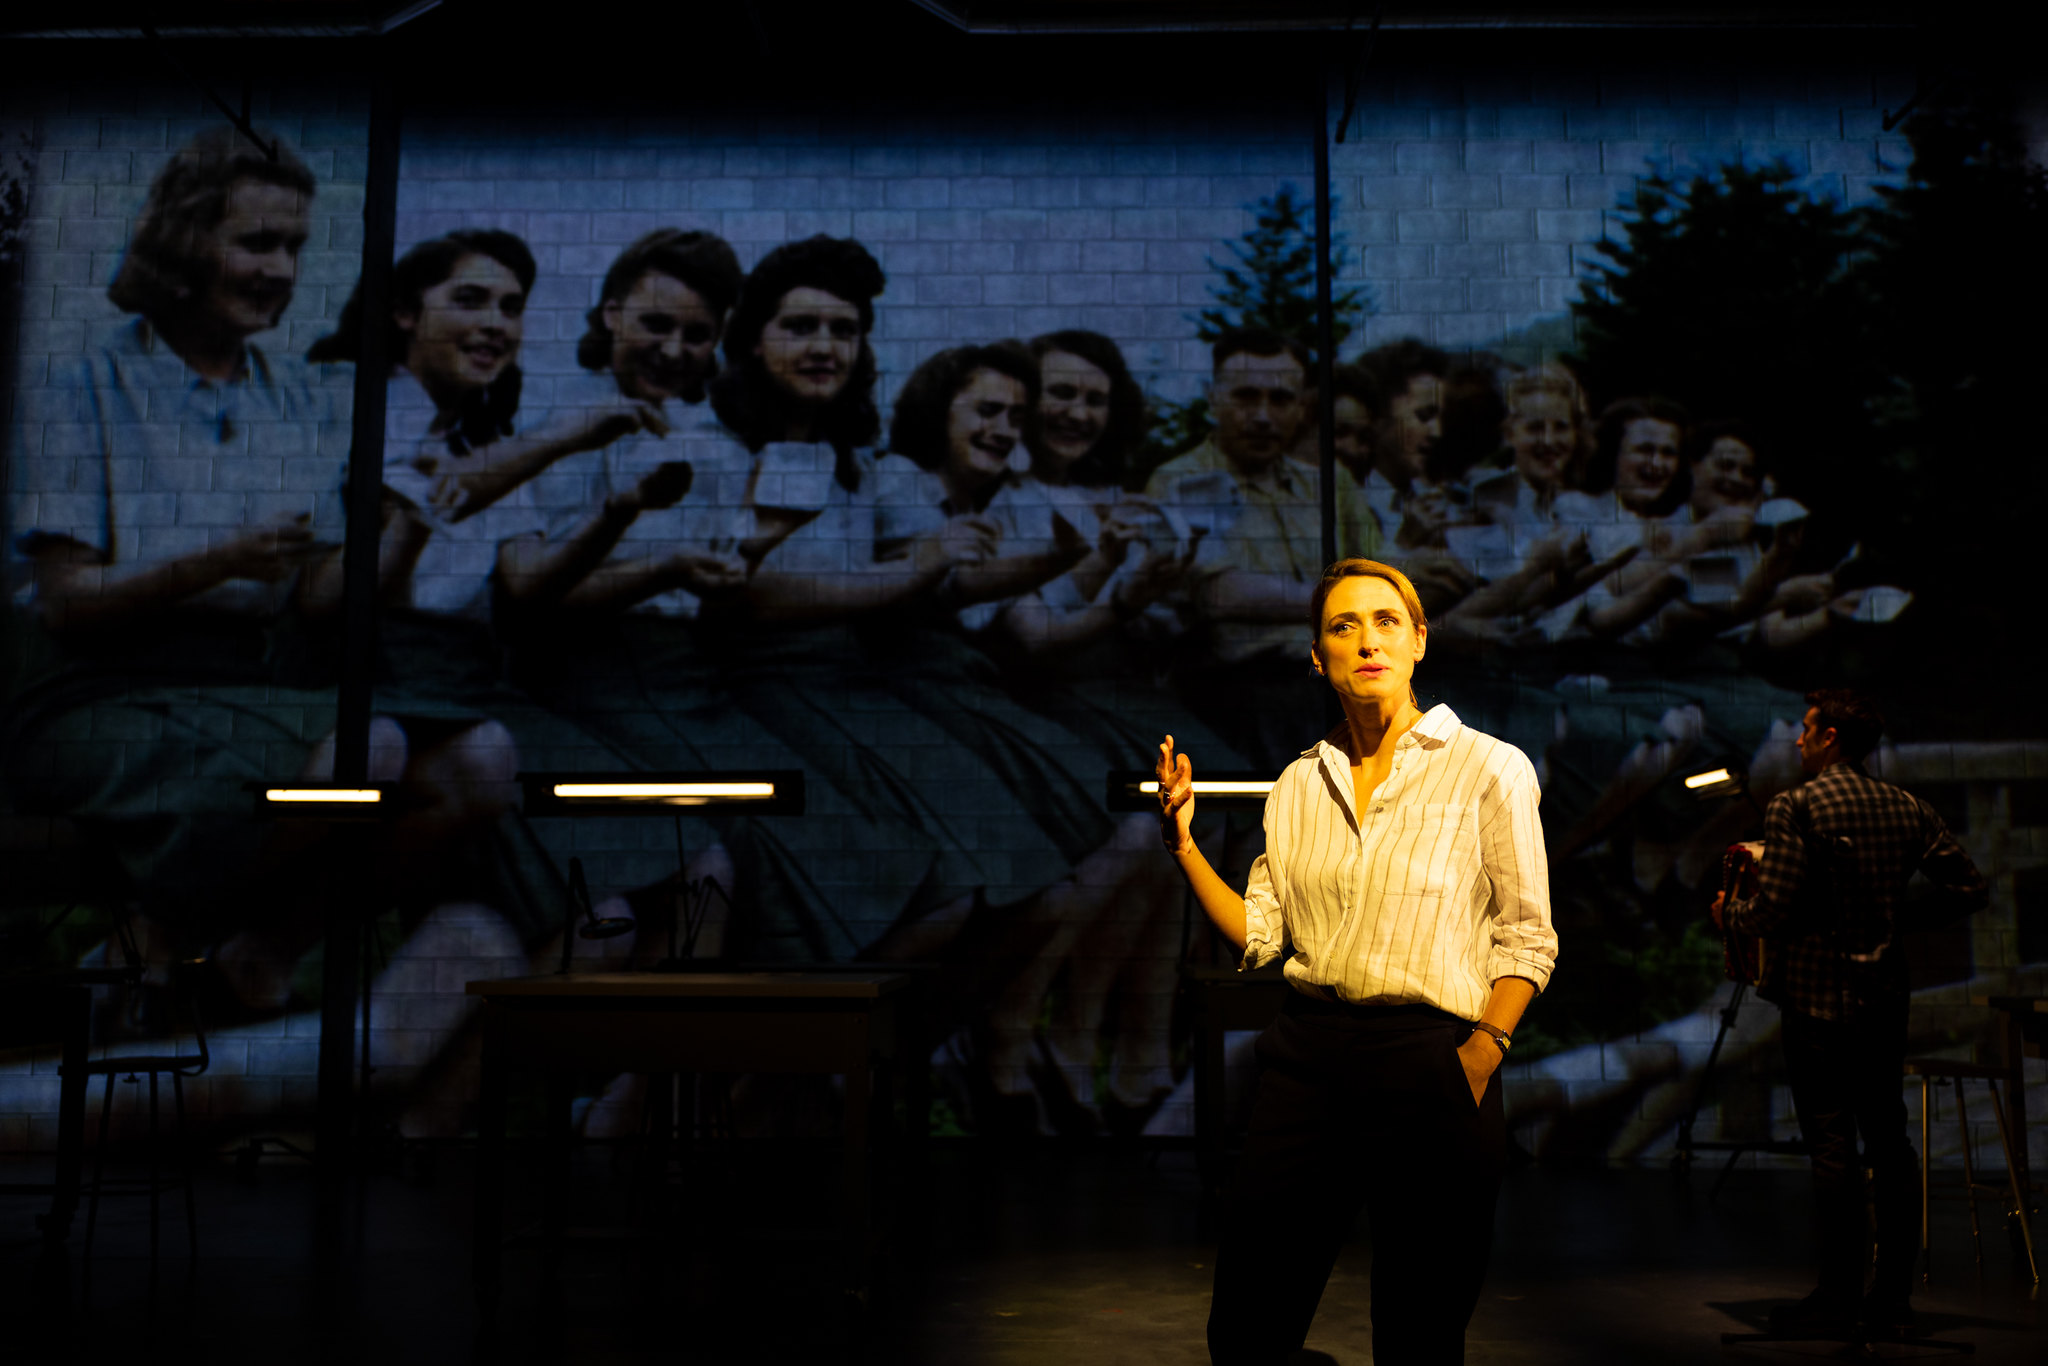 Elizabeth Stahlmann as U.S. Holocaust Memorial Museum archivist Rebecca Erbelding in “Here There Are Blueberries.” In the background is a photograph of young women employed at the Auschwitz concentration camp, relaxing and eating blueberries. (Rich Soublet II)